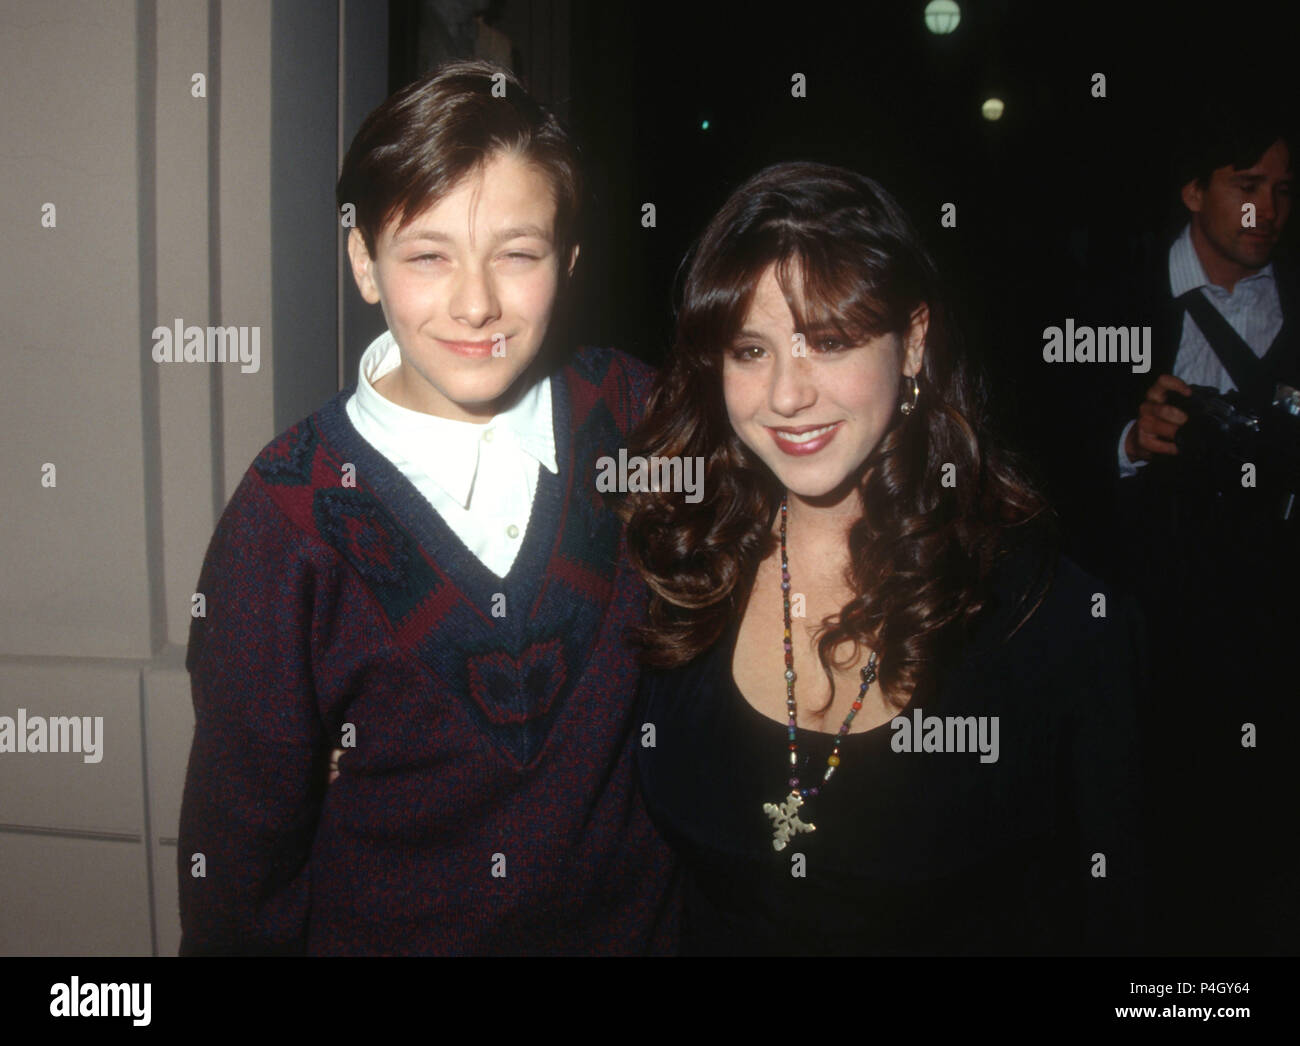 LOS ANGELES, CA - NOVEMBER 13: (L-R) Actor Edward Furlong and actress Soleil Moon Frye attend 'And You Thought Your Parents Were Weird' on November 13, 1991 at the Beverly Connection in Los Angeles, California. Photo by Barry King/Alamy Stock Photo Stock Photo